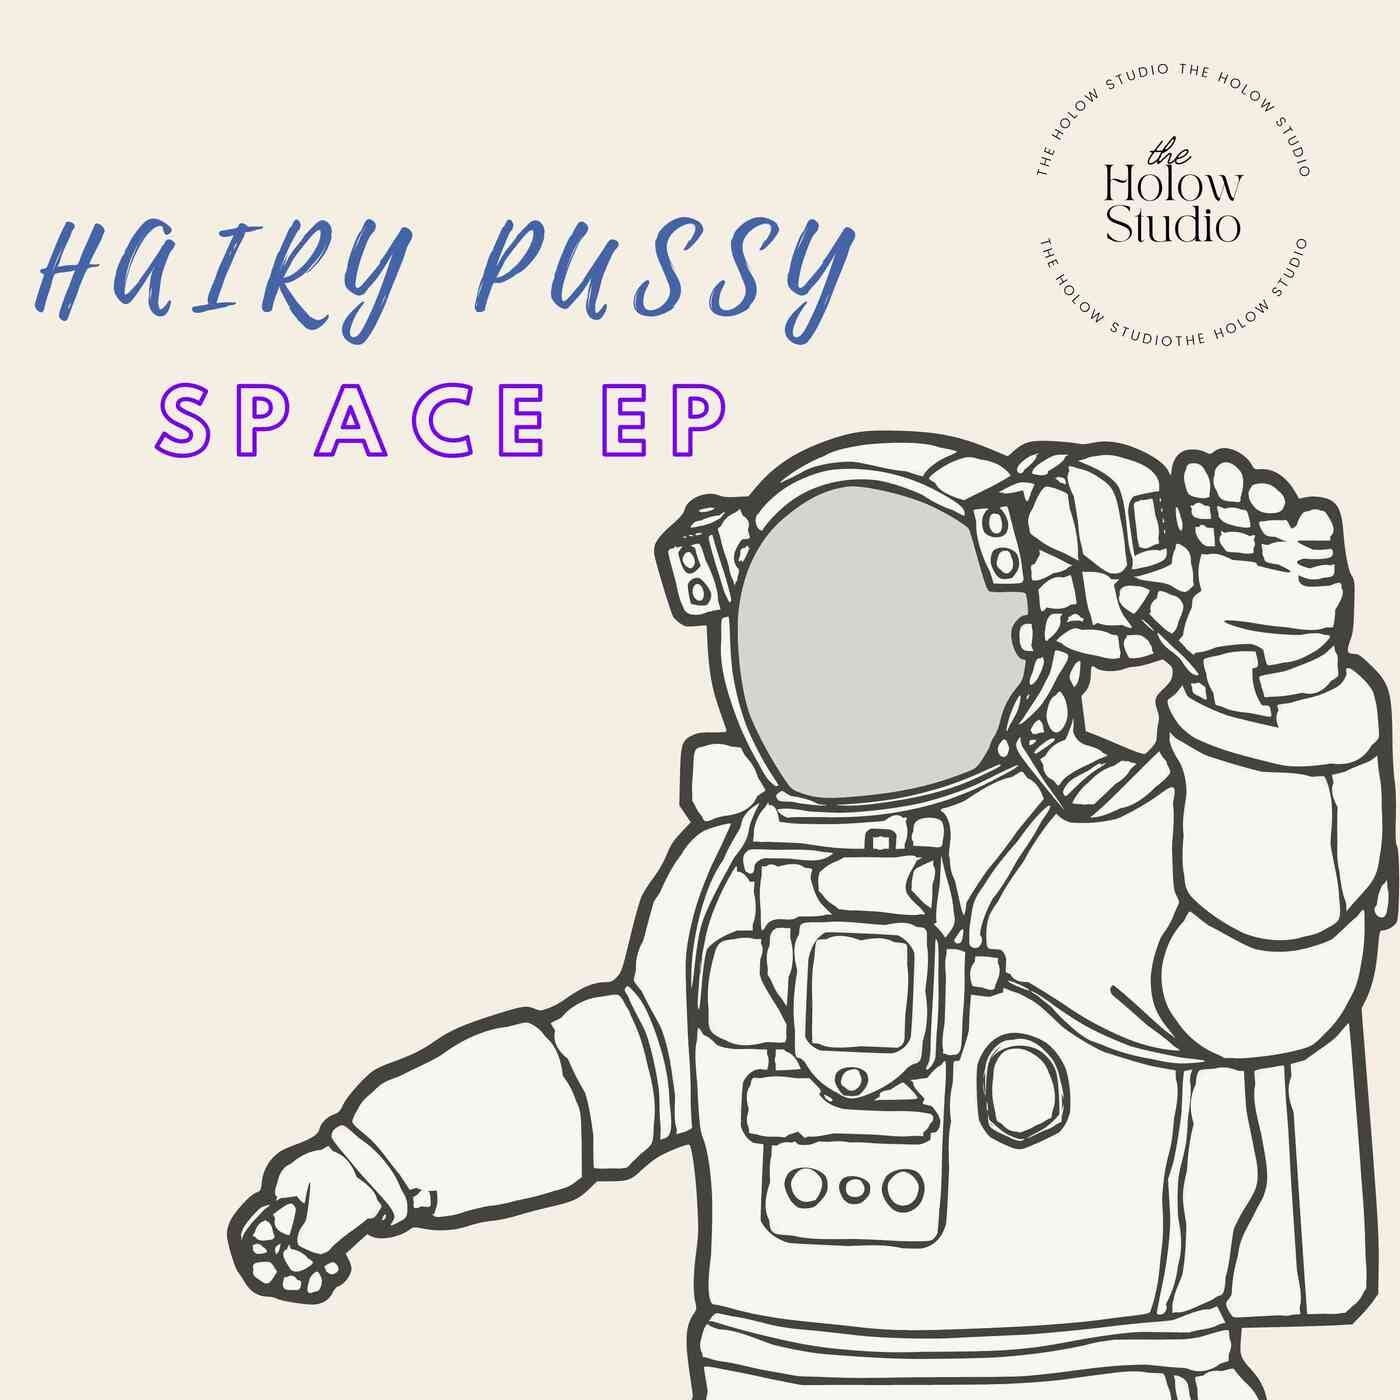 SPACE EP